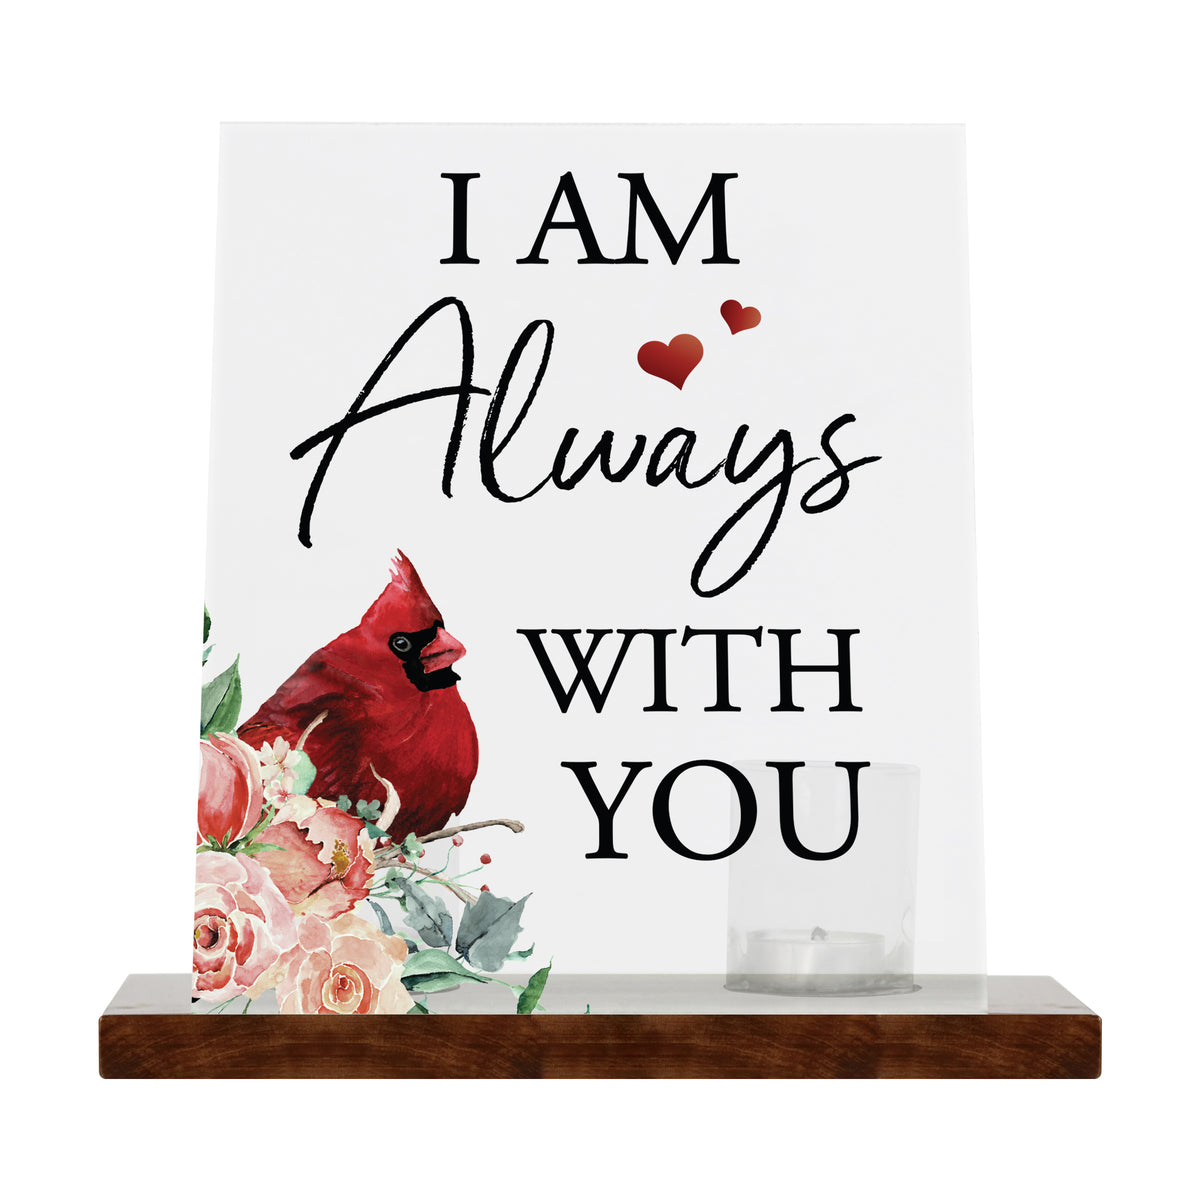 LifeSong Memorials Vintage Memorial Cardinal Acrylic Sign Candle Holder With Wood Base And Glass Votives For Home Decor | I am Always With You. Acrylic candle holders, Vintage acrylic candle holders, glass candle holders for Living Room, Bedroom, Kitchen, Dining Room, and Entryways decor perfect memorial bereavement keepsake gift ideas for Family &amp; Friends.